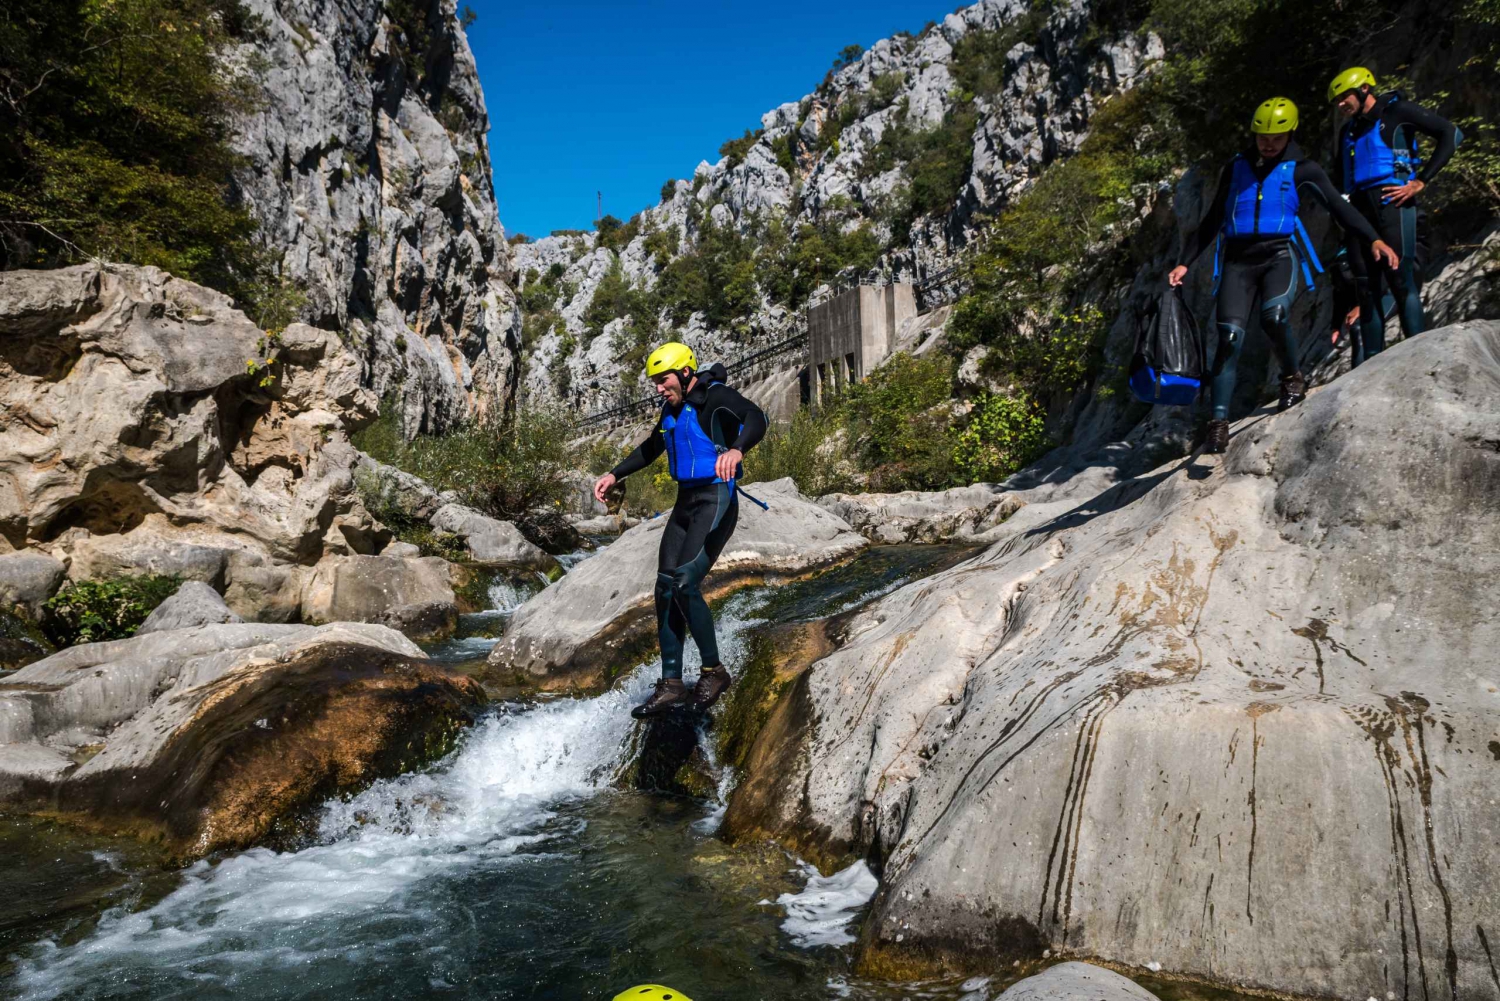 Split: Water Canyoning on Cetina River